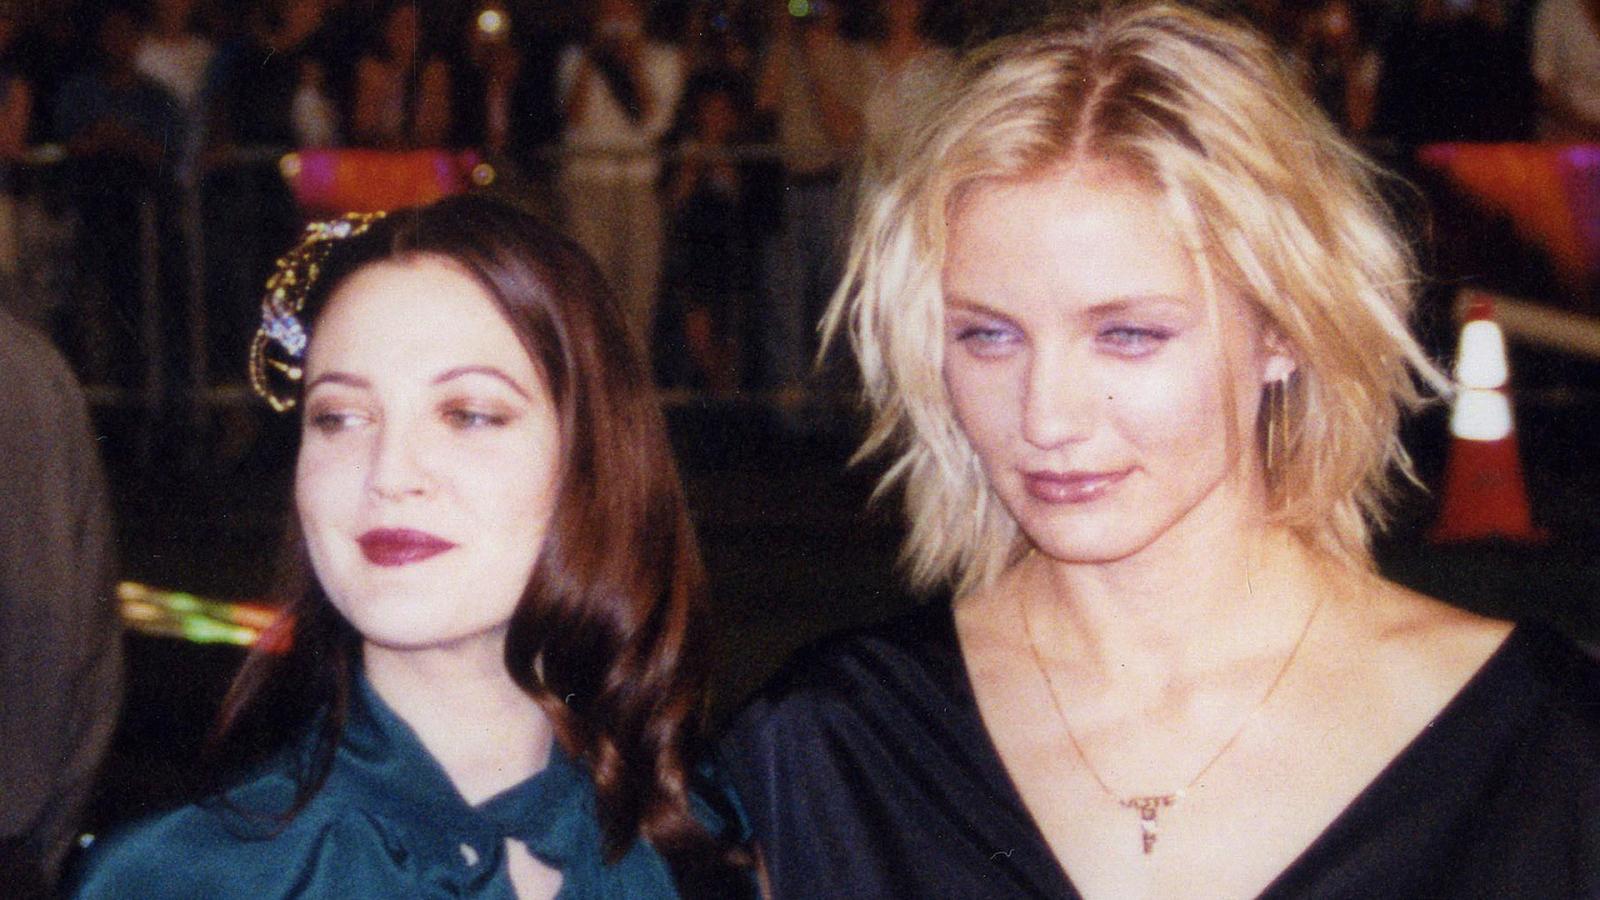 Friends Through the Years: 5 Celebrity Friendships That Inspire Hope in Humanity - image 3